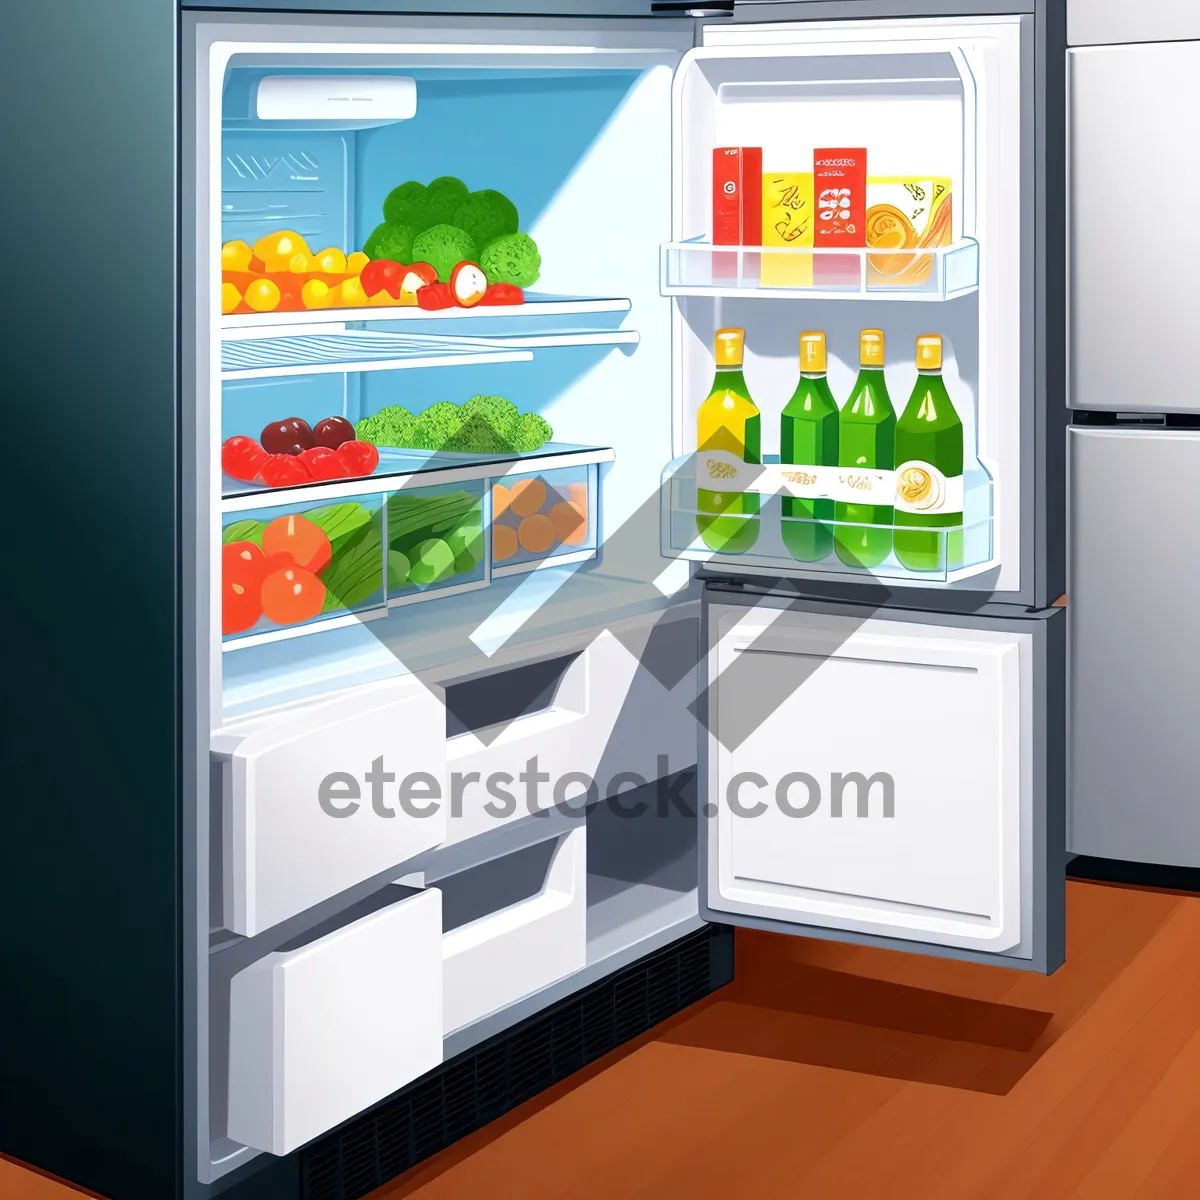 Picture of Modern Refrigerator in Stylish Home Interior - 3D Design